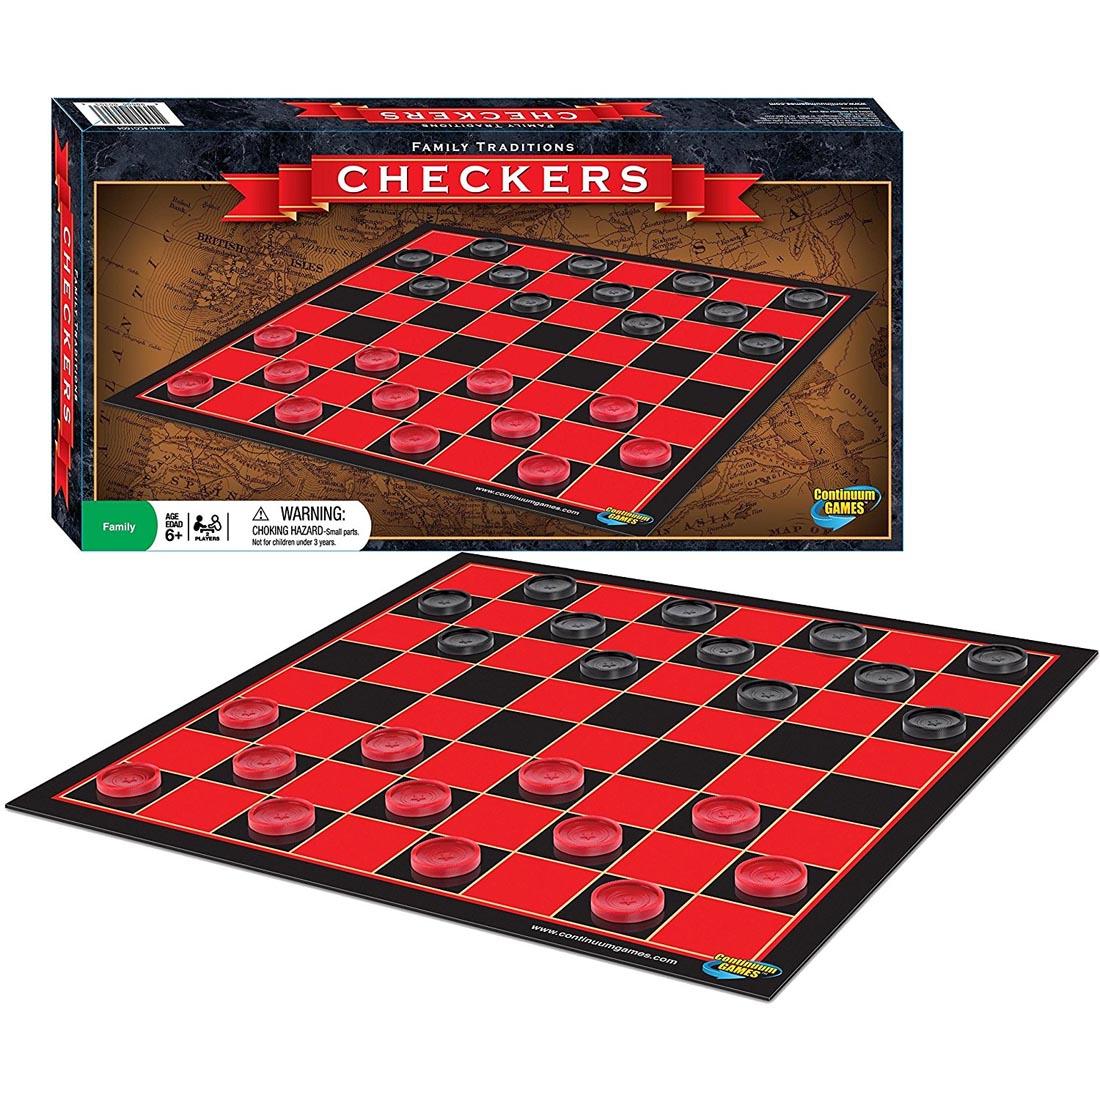 Checkers Board and pieces with their box behind them